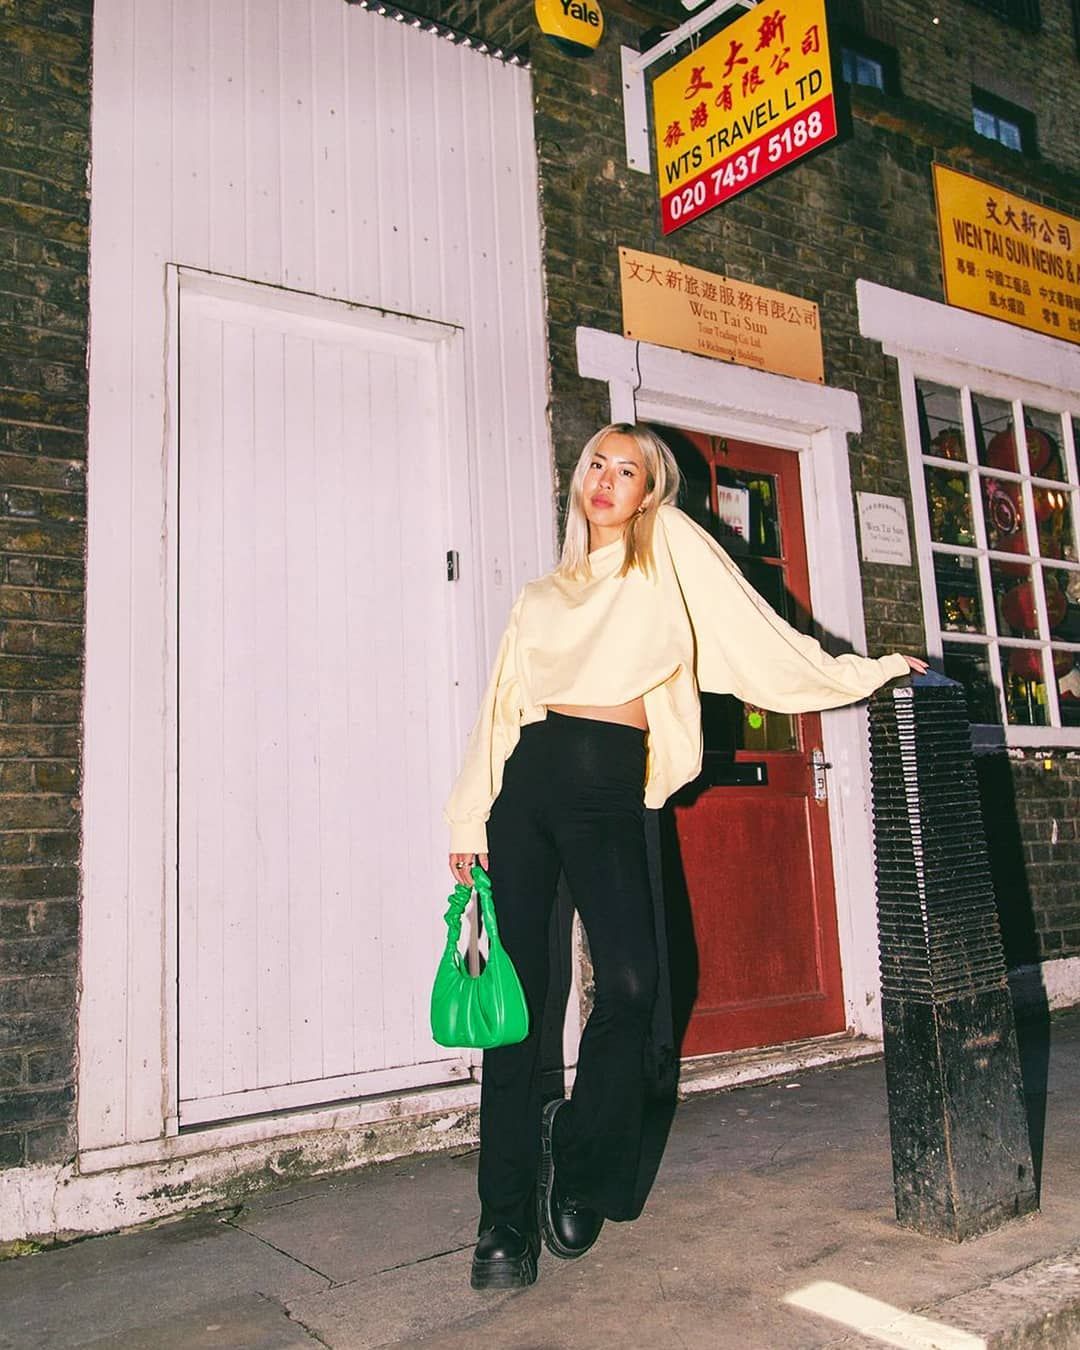 jess cheng from asos holds a green gabbi bag in front of a restaurant